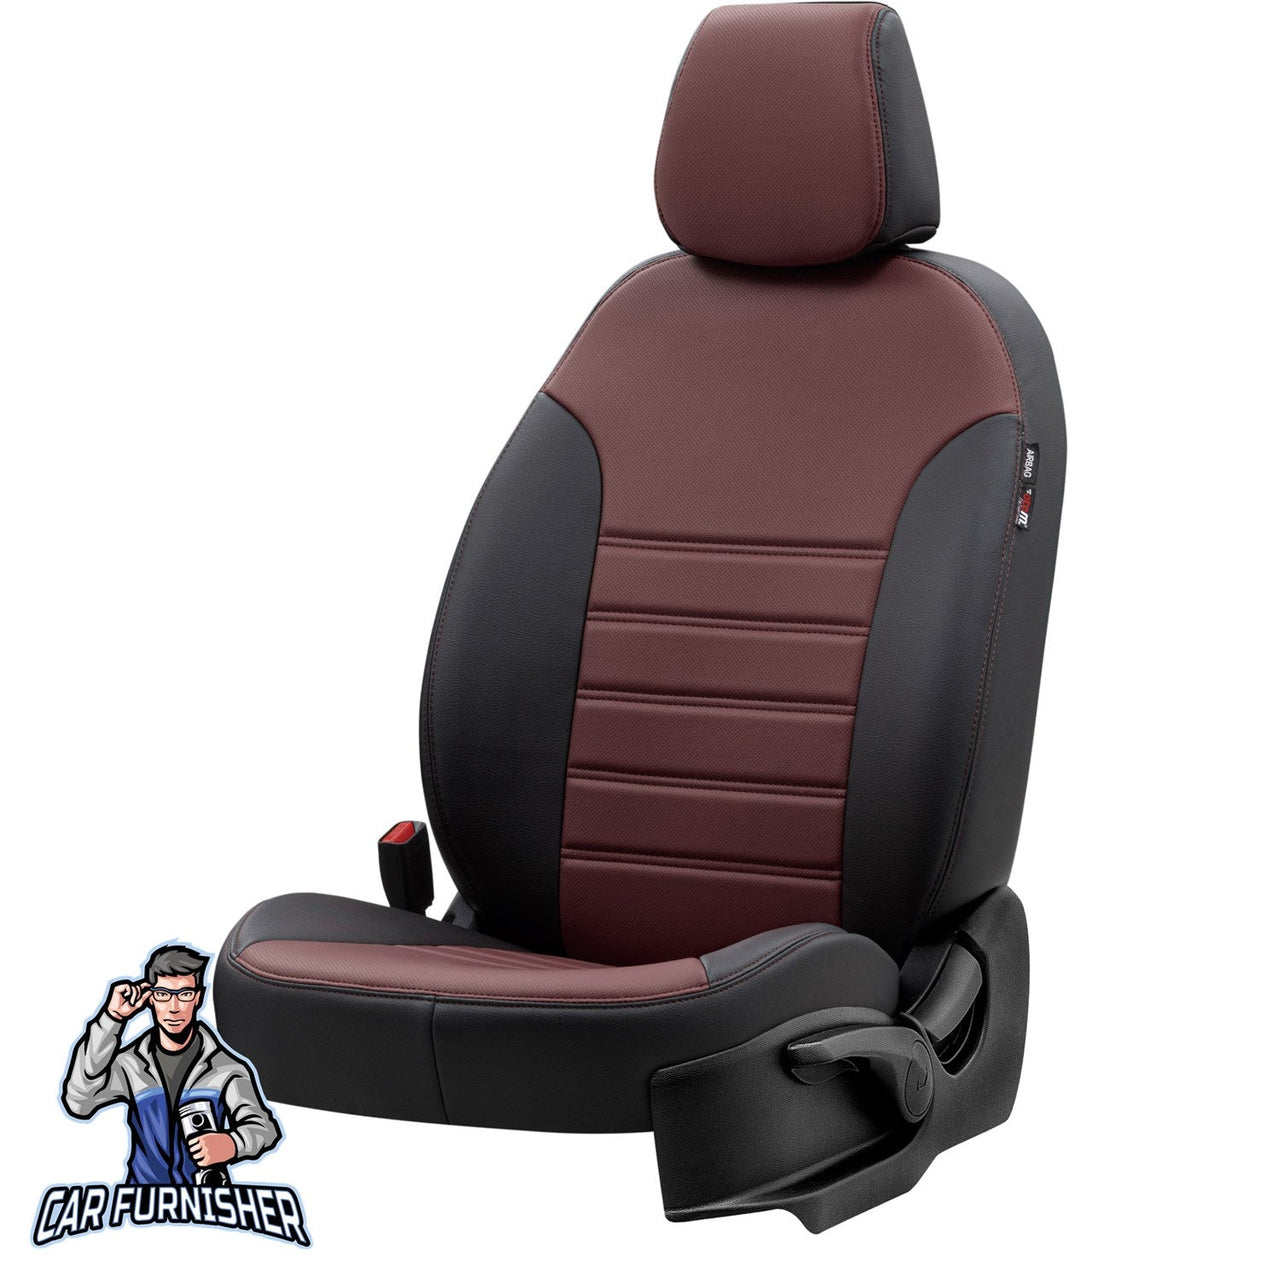 Volkswagen Caddy Seat Cover Istanbul Leather Design Burgundy Leather